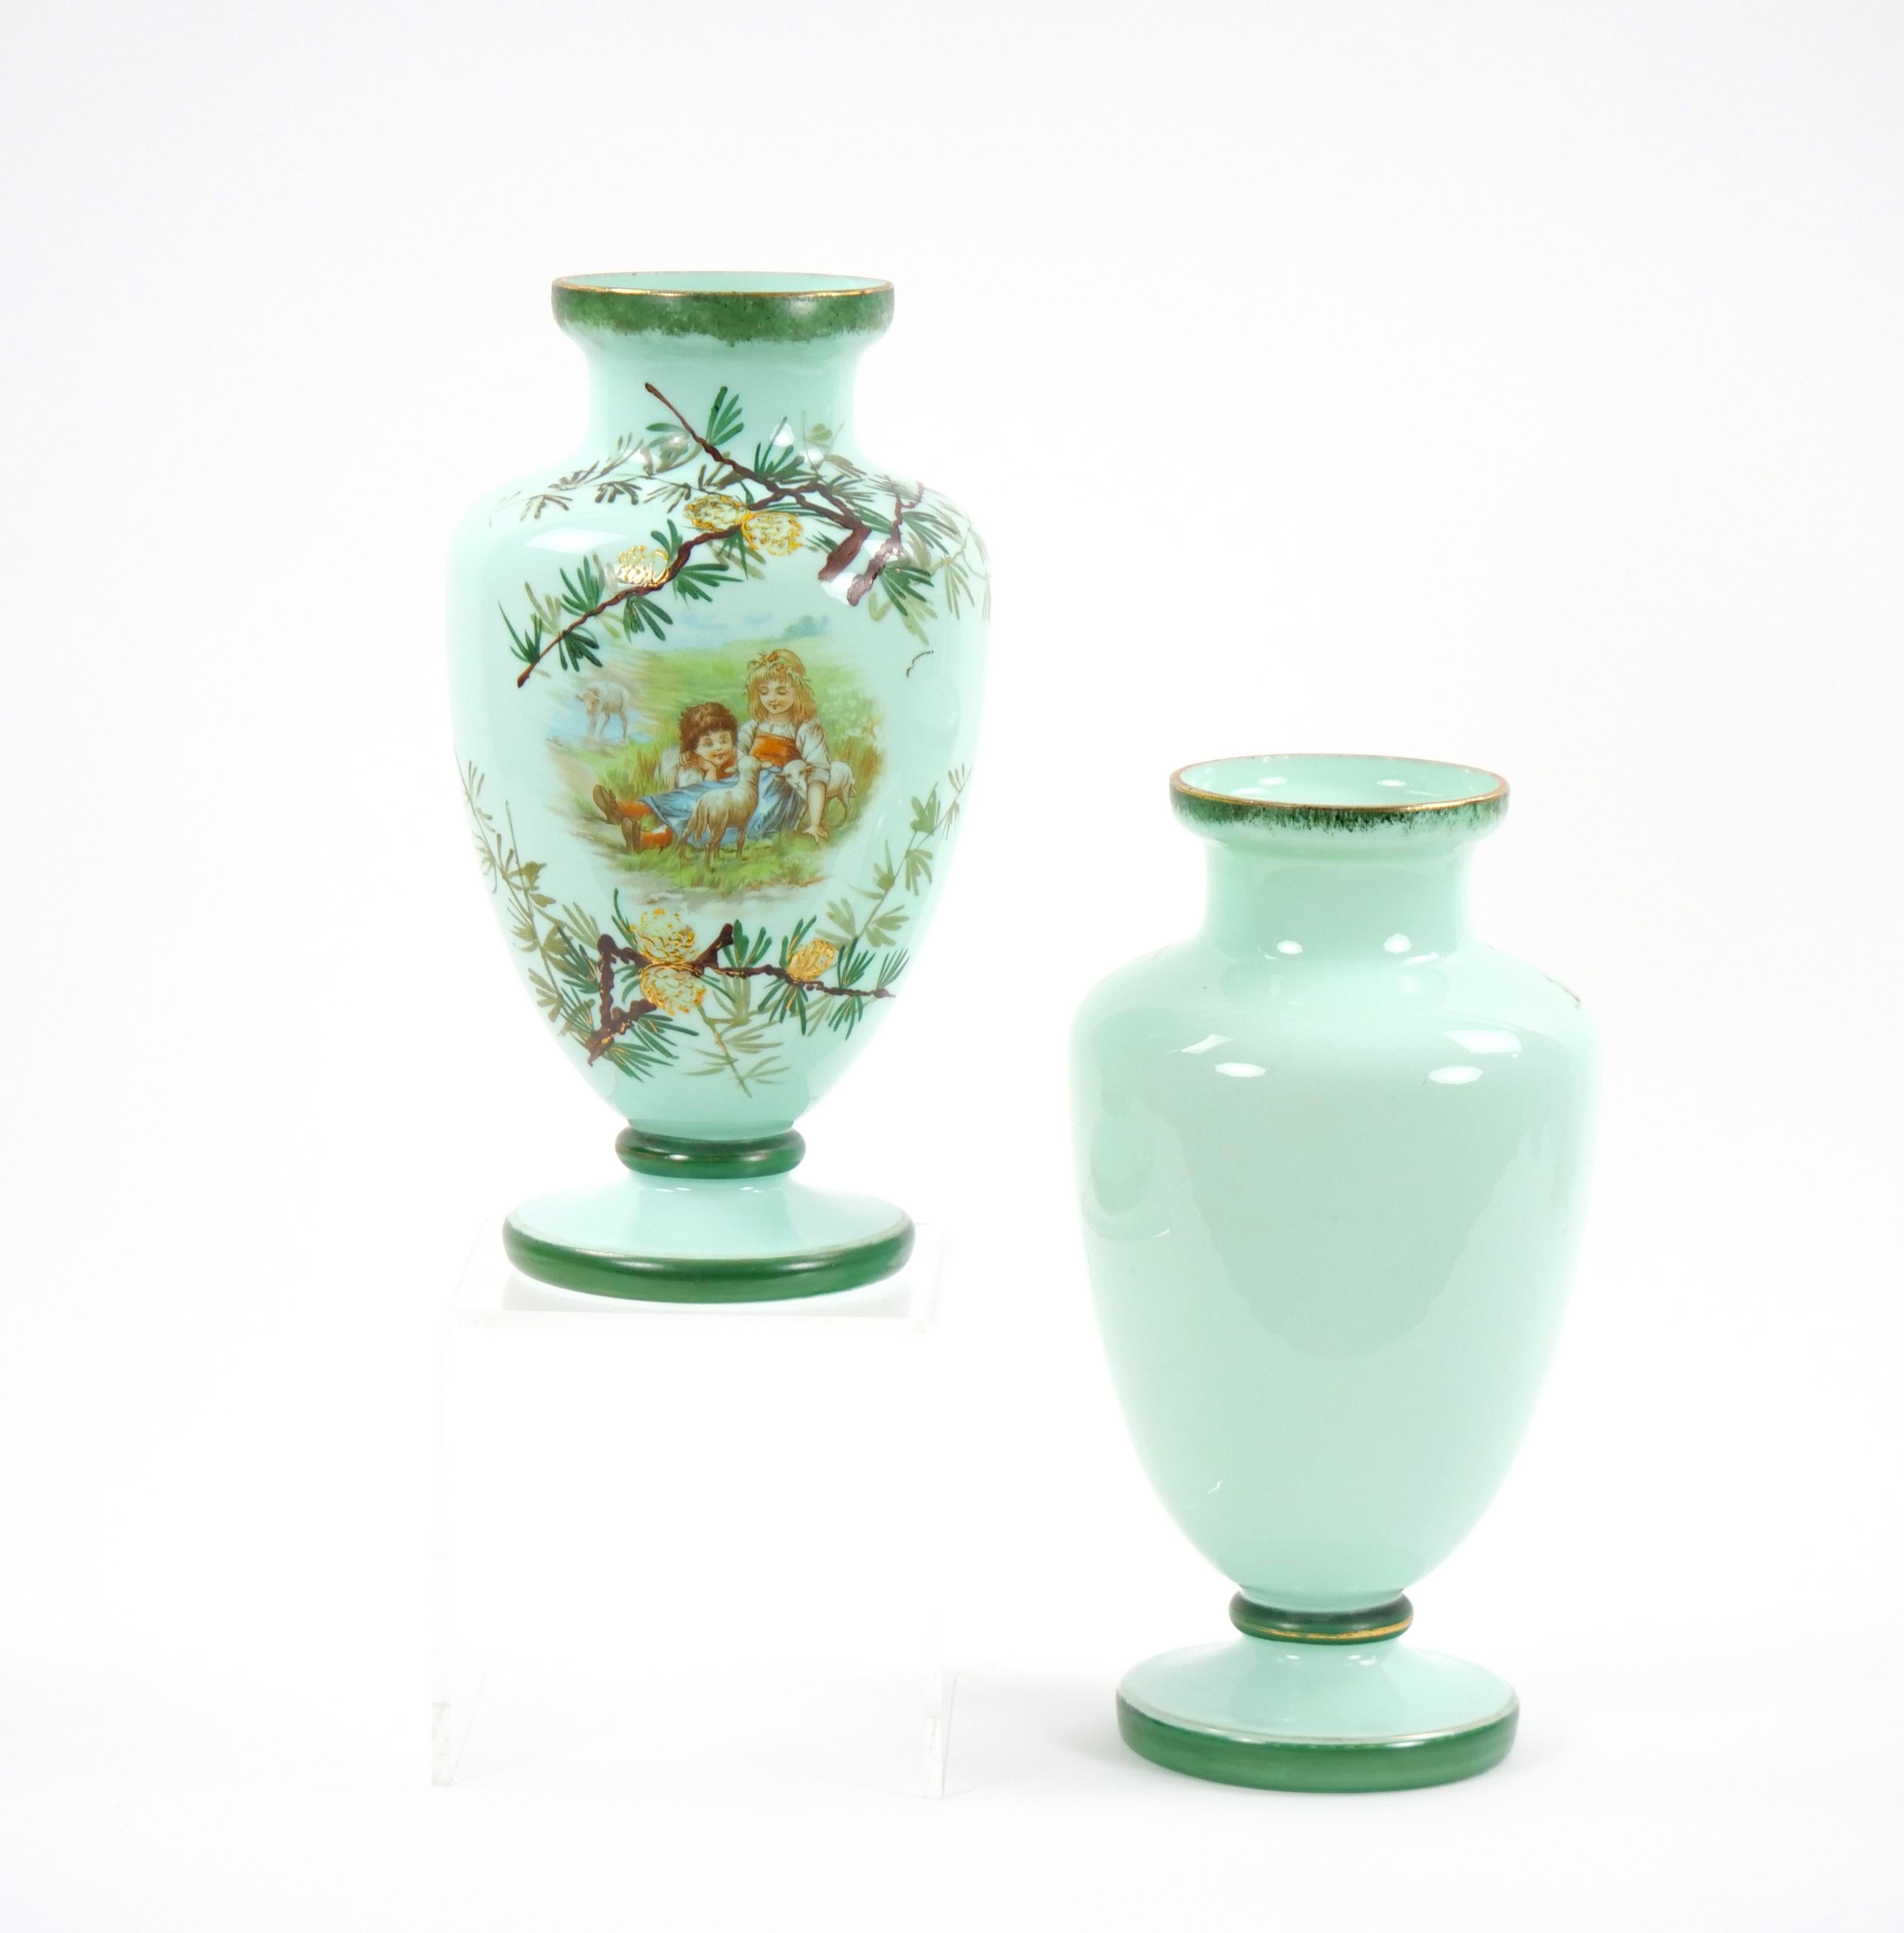 
Transport yourself to the early 20th century with these exquisite French hand-painted art glass decorative vases. Adorned with captivating scenes, each vase tells a story of innocence and joy as children gather around a pinecone tree, engaged in